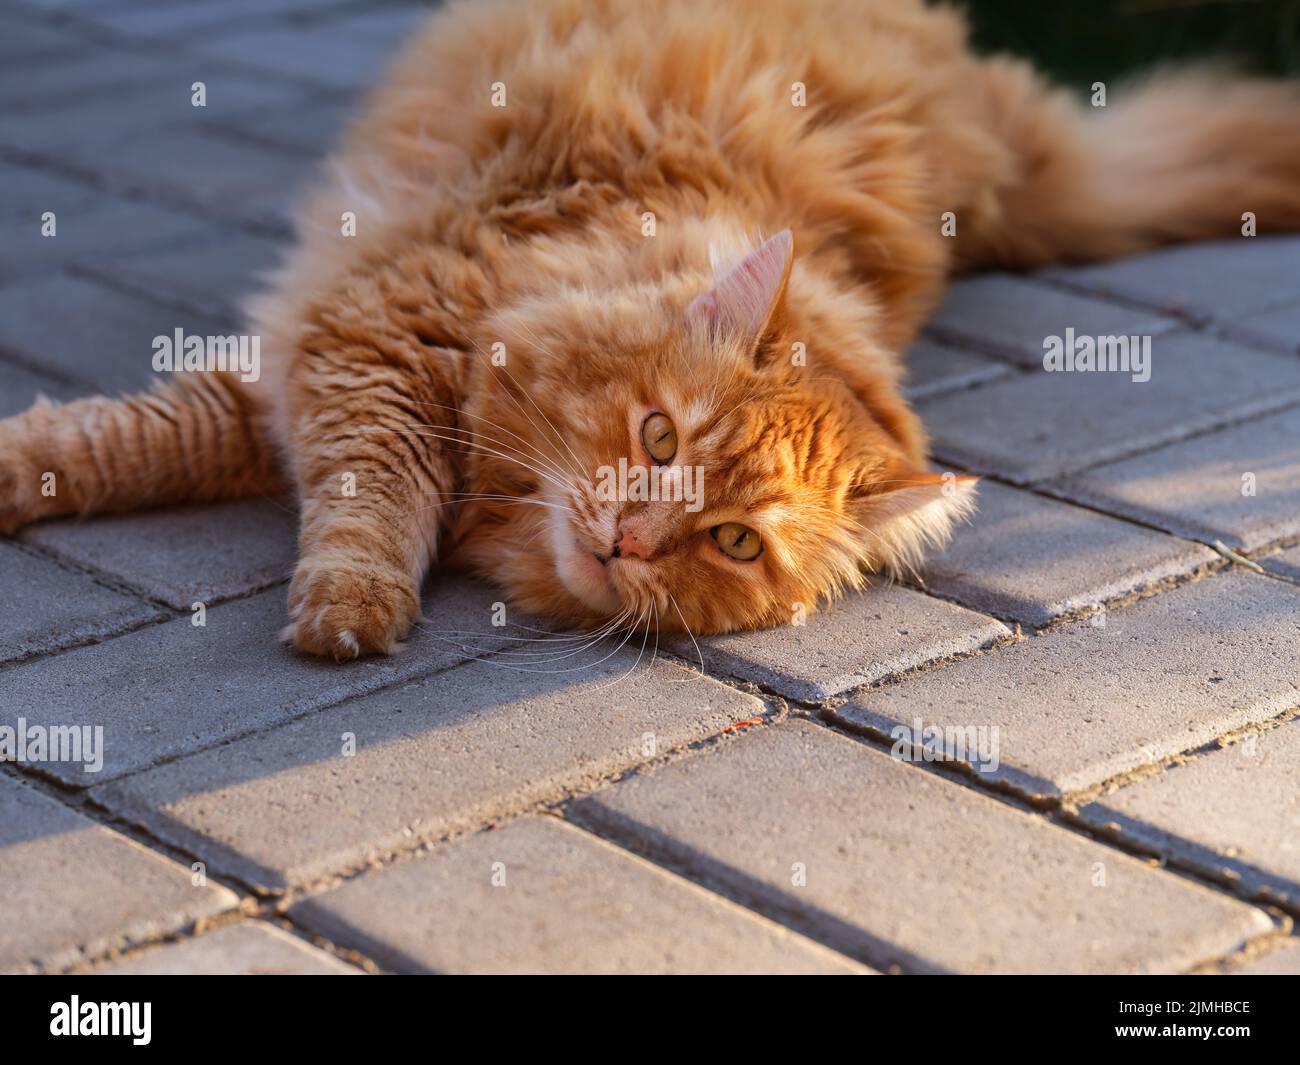 A Ginger cat lying on paving slabs. Stock Photo